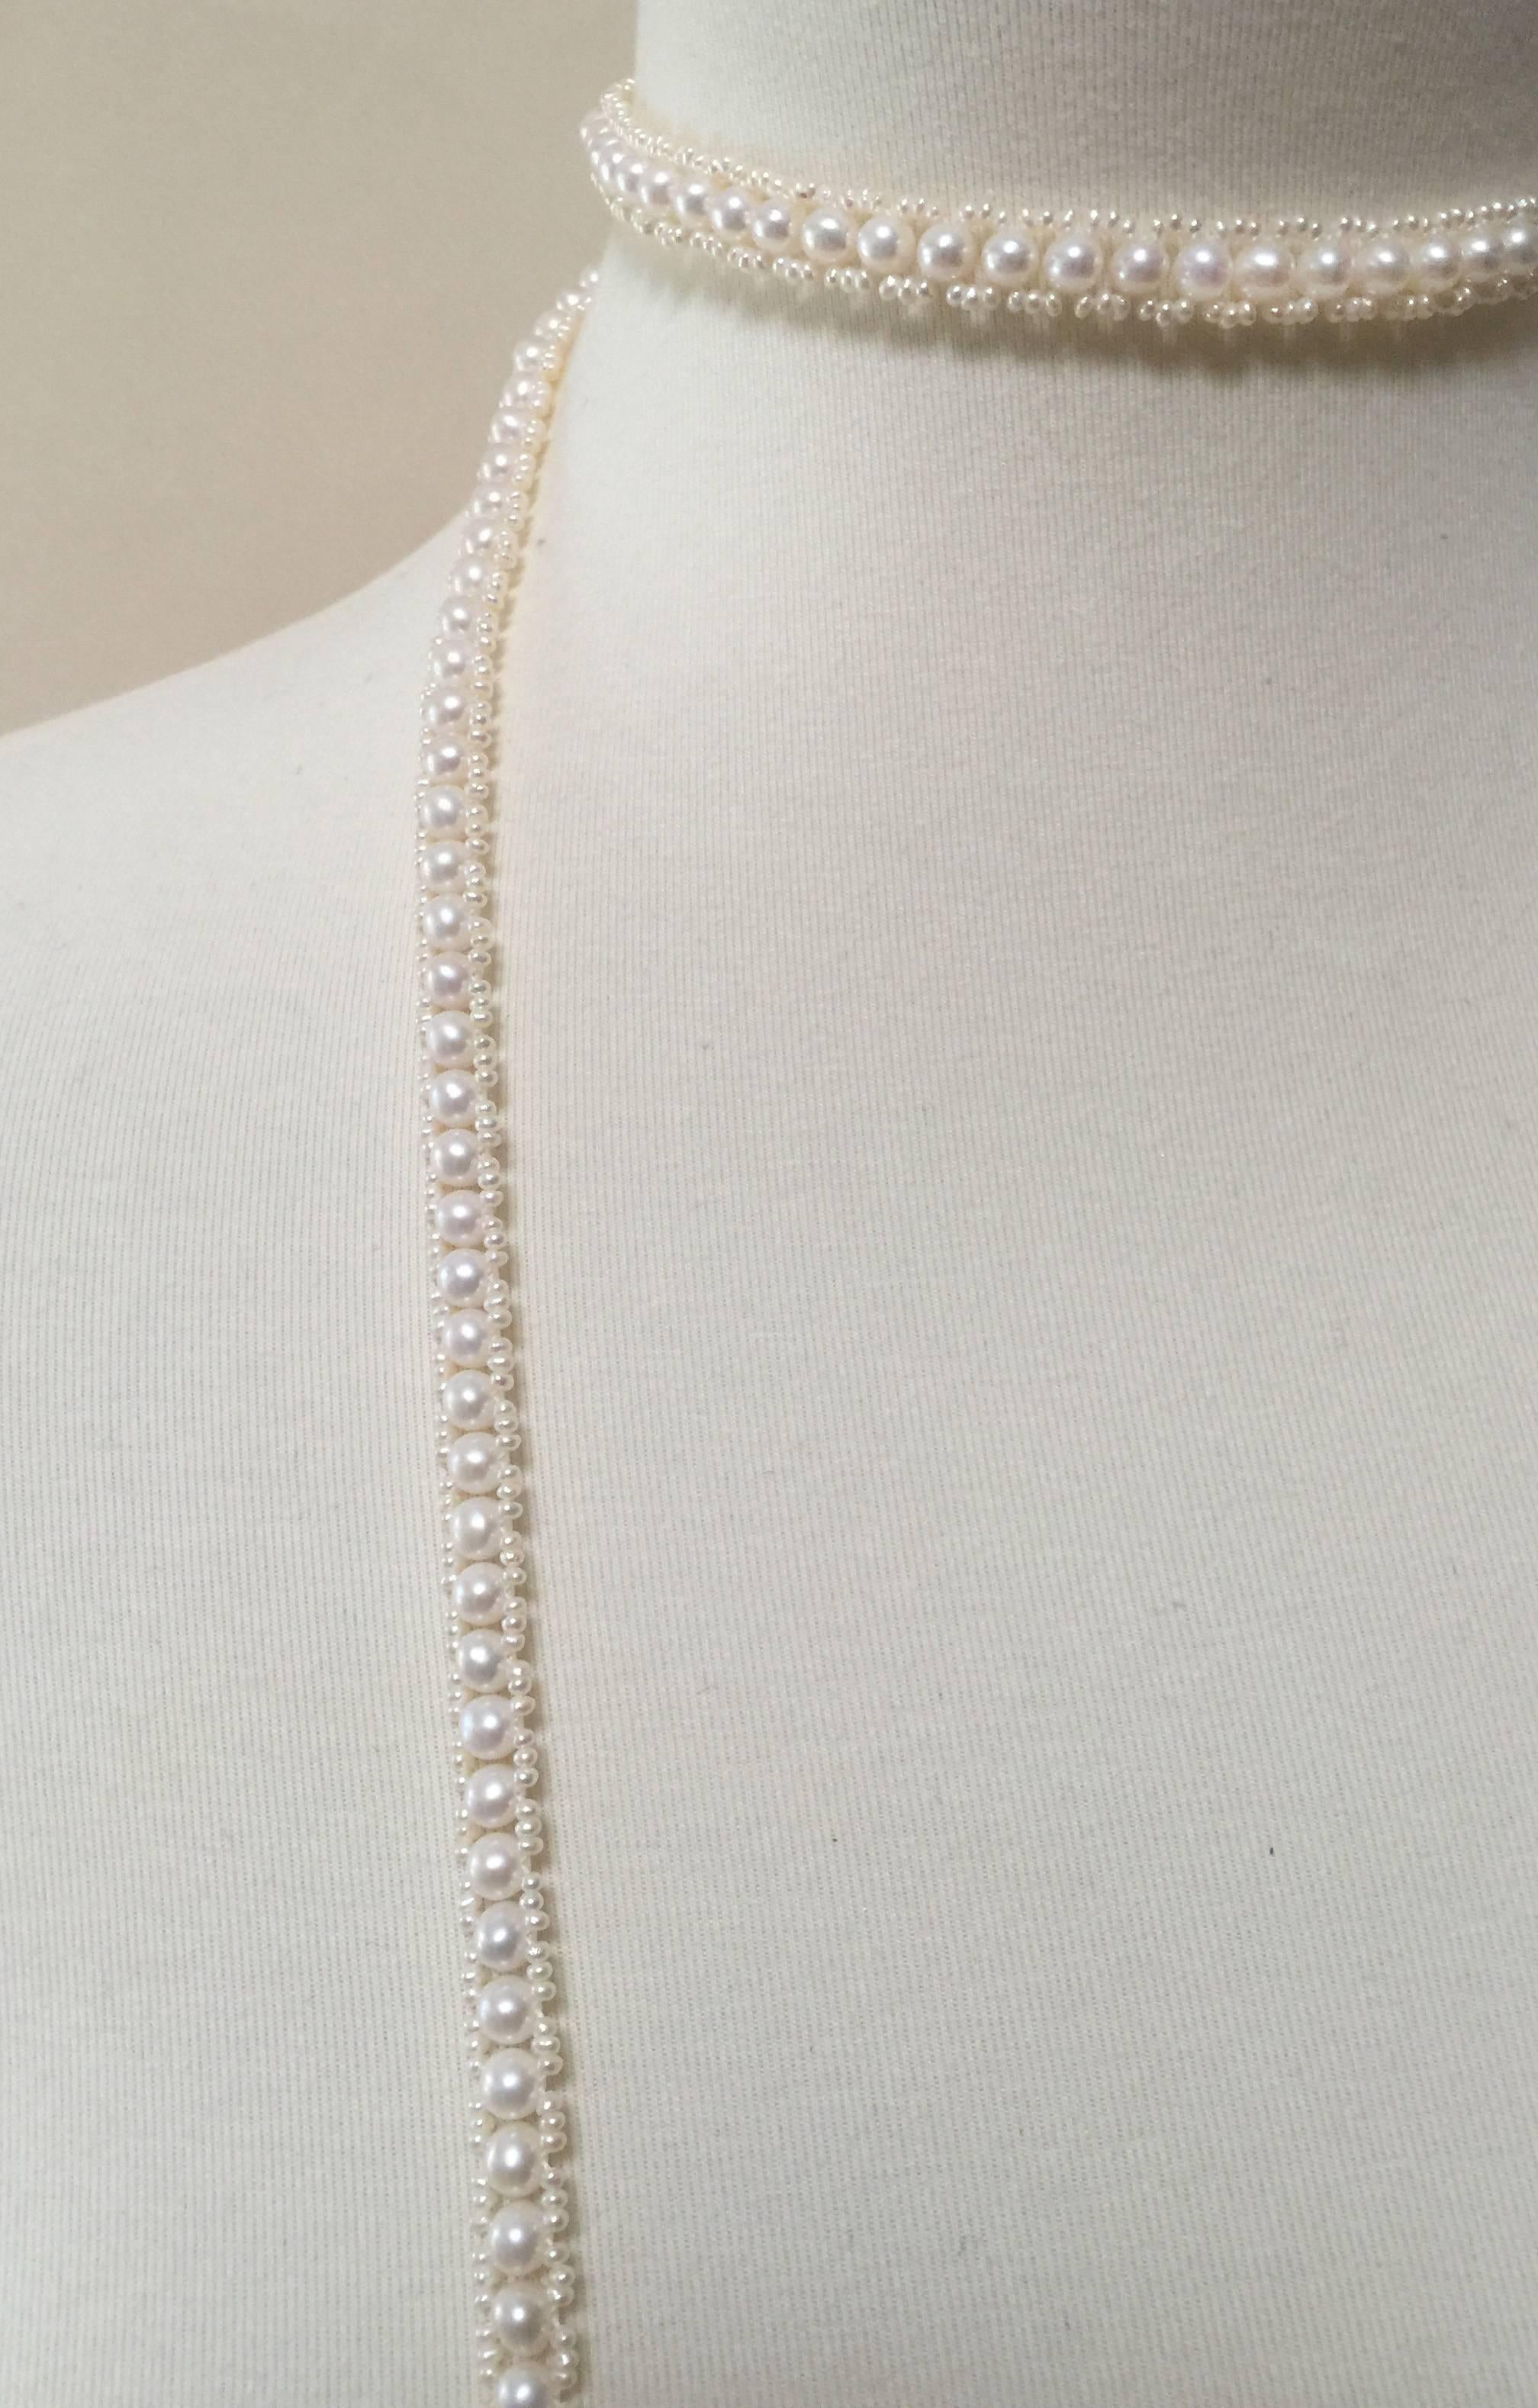 The combination of 1mm and 6mm glistening flawless pearls, creates an elegant lace like design that is exclusive to the Marina J. collection. The tassels start with a three quarter oval pearl and diamond encrusted silver roundel. Small seed pearl